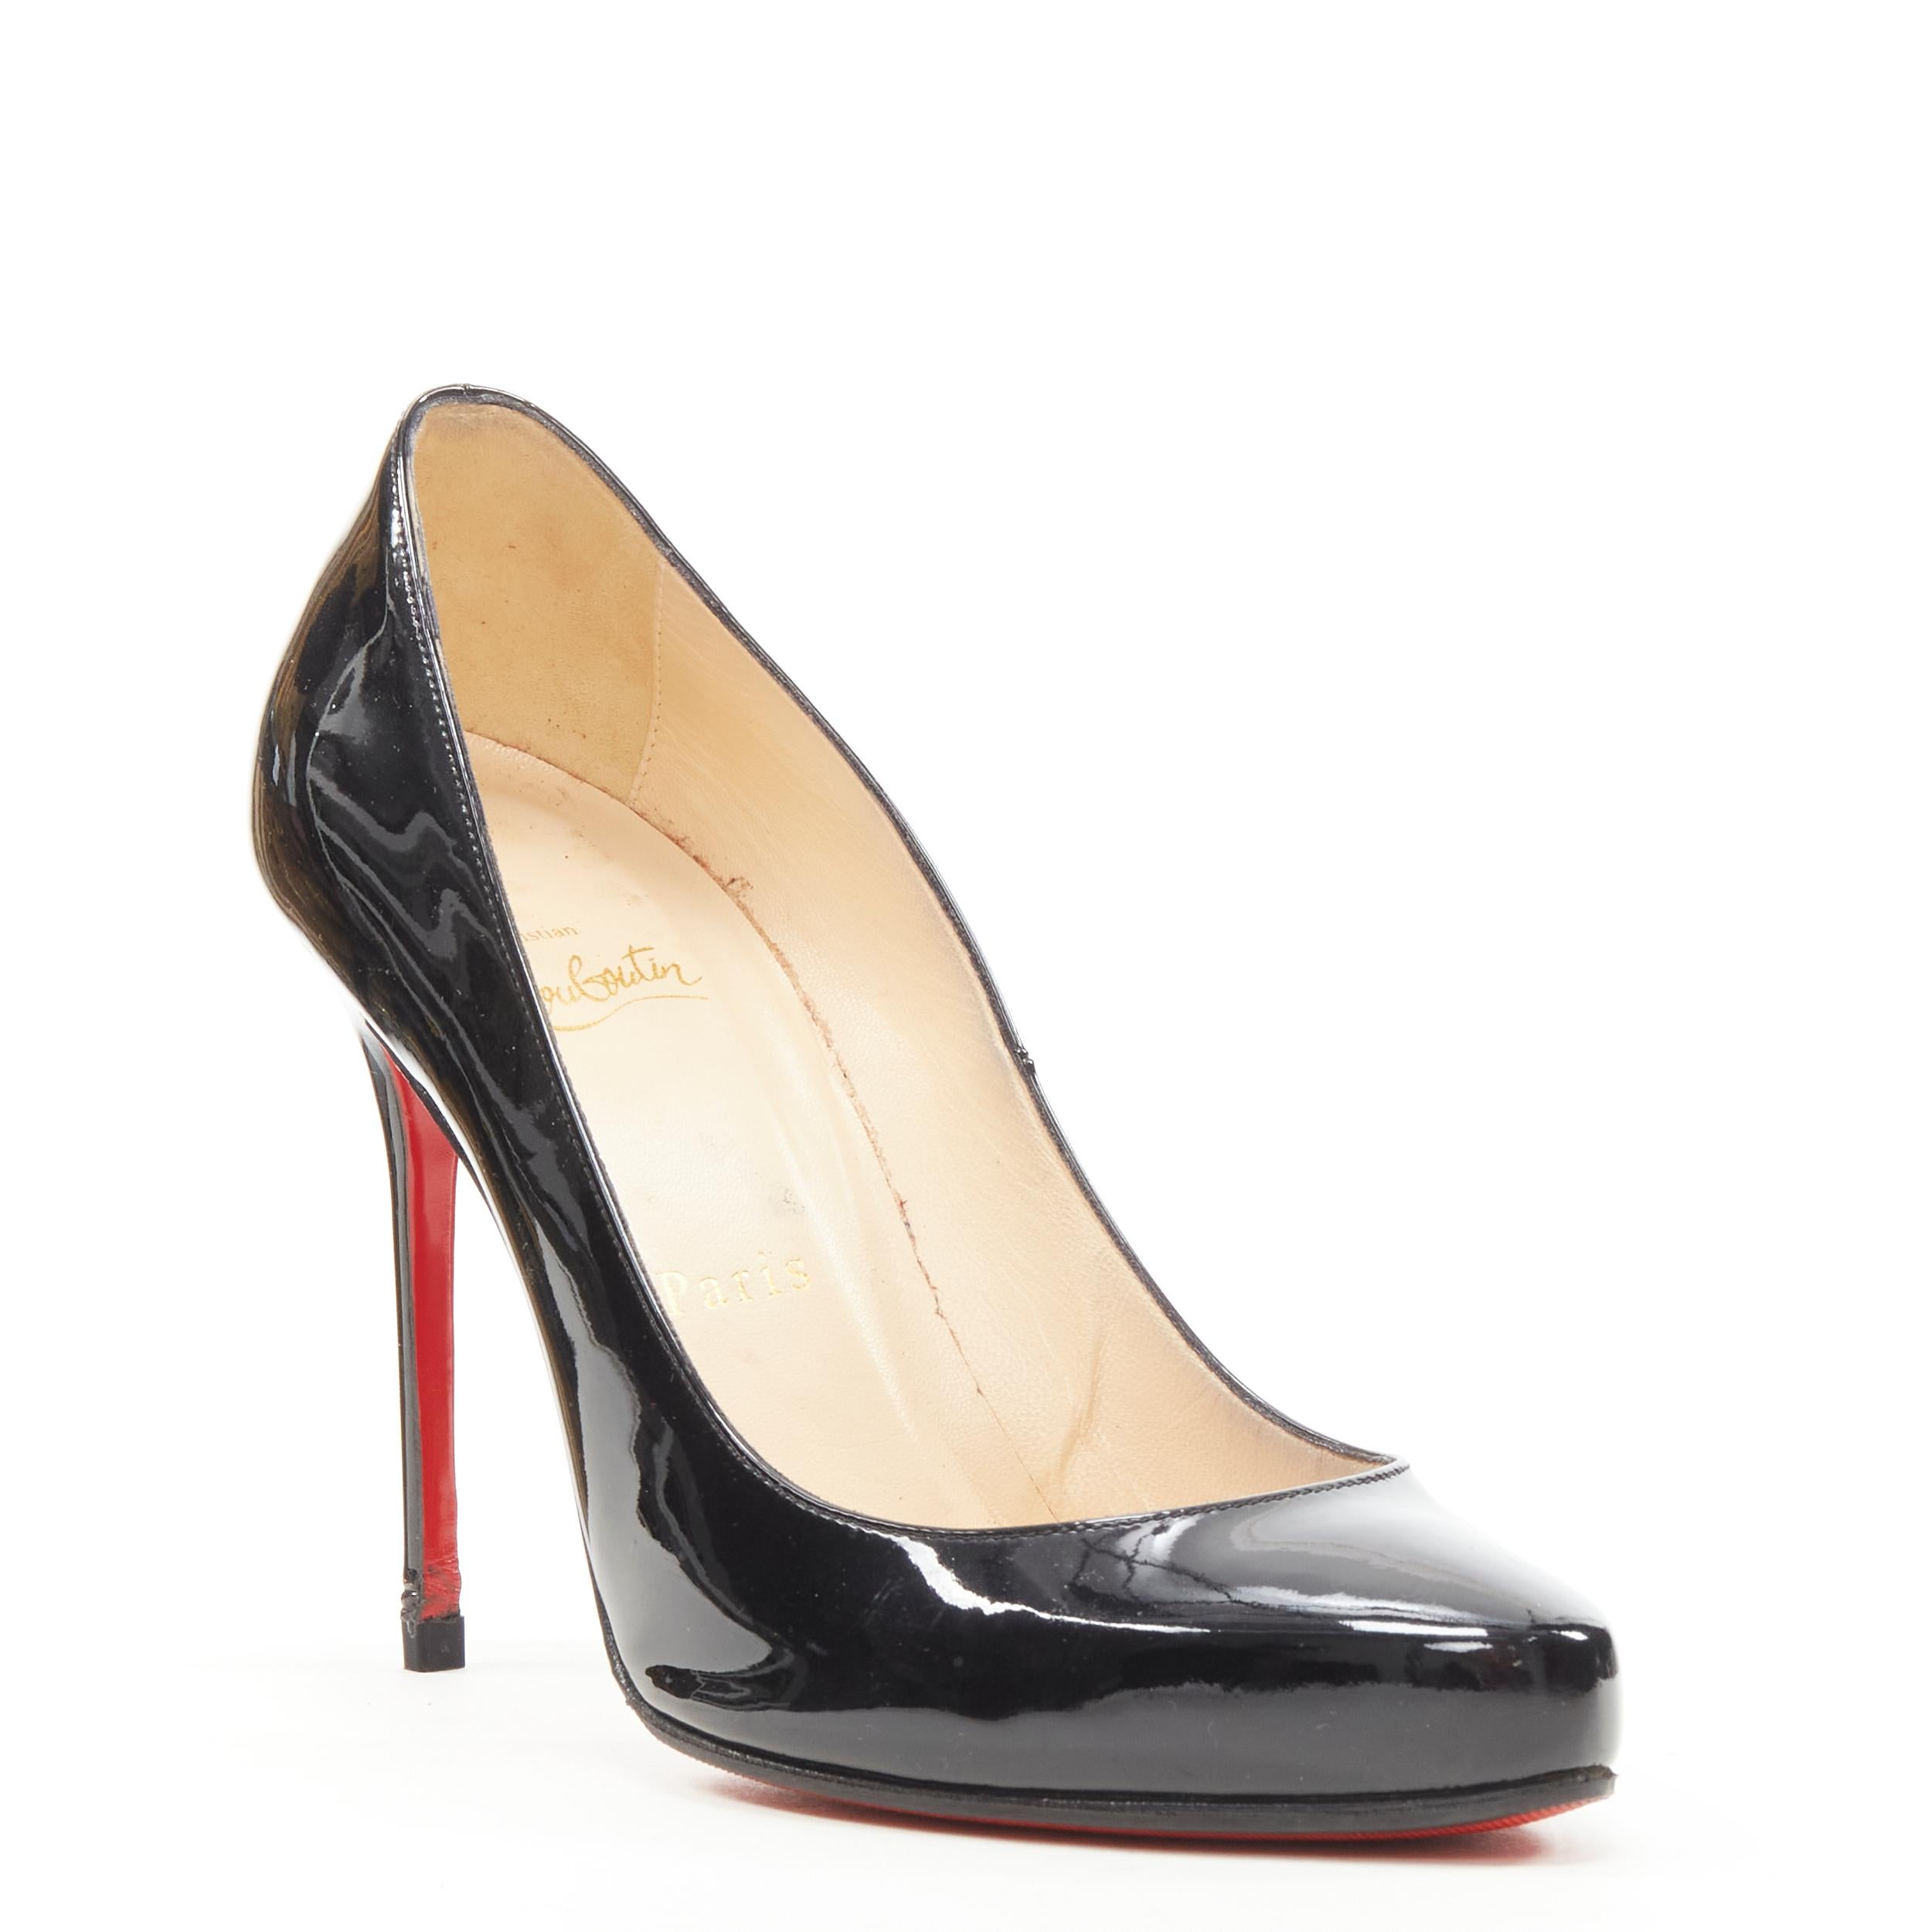 CHRISTIAN LOUBOUTIN black patent rounded point classic stiletto pump EU38.5 
Reference: KEDG/A00129 
Brand: Christian Louboutin 
Material: Patent Leather 
Color: Black 
Pattern: Solid 
Extra Detail: Rounded point toe. Stiletto heel. 
Made in: Italy